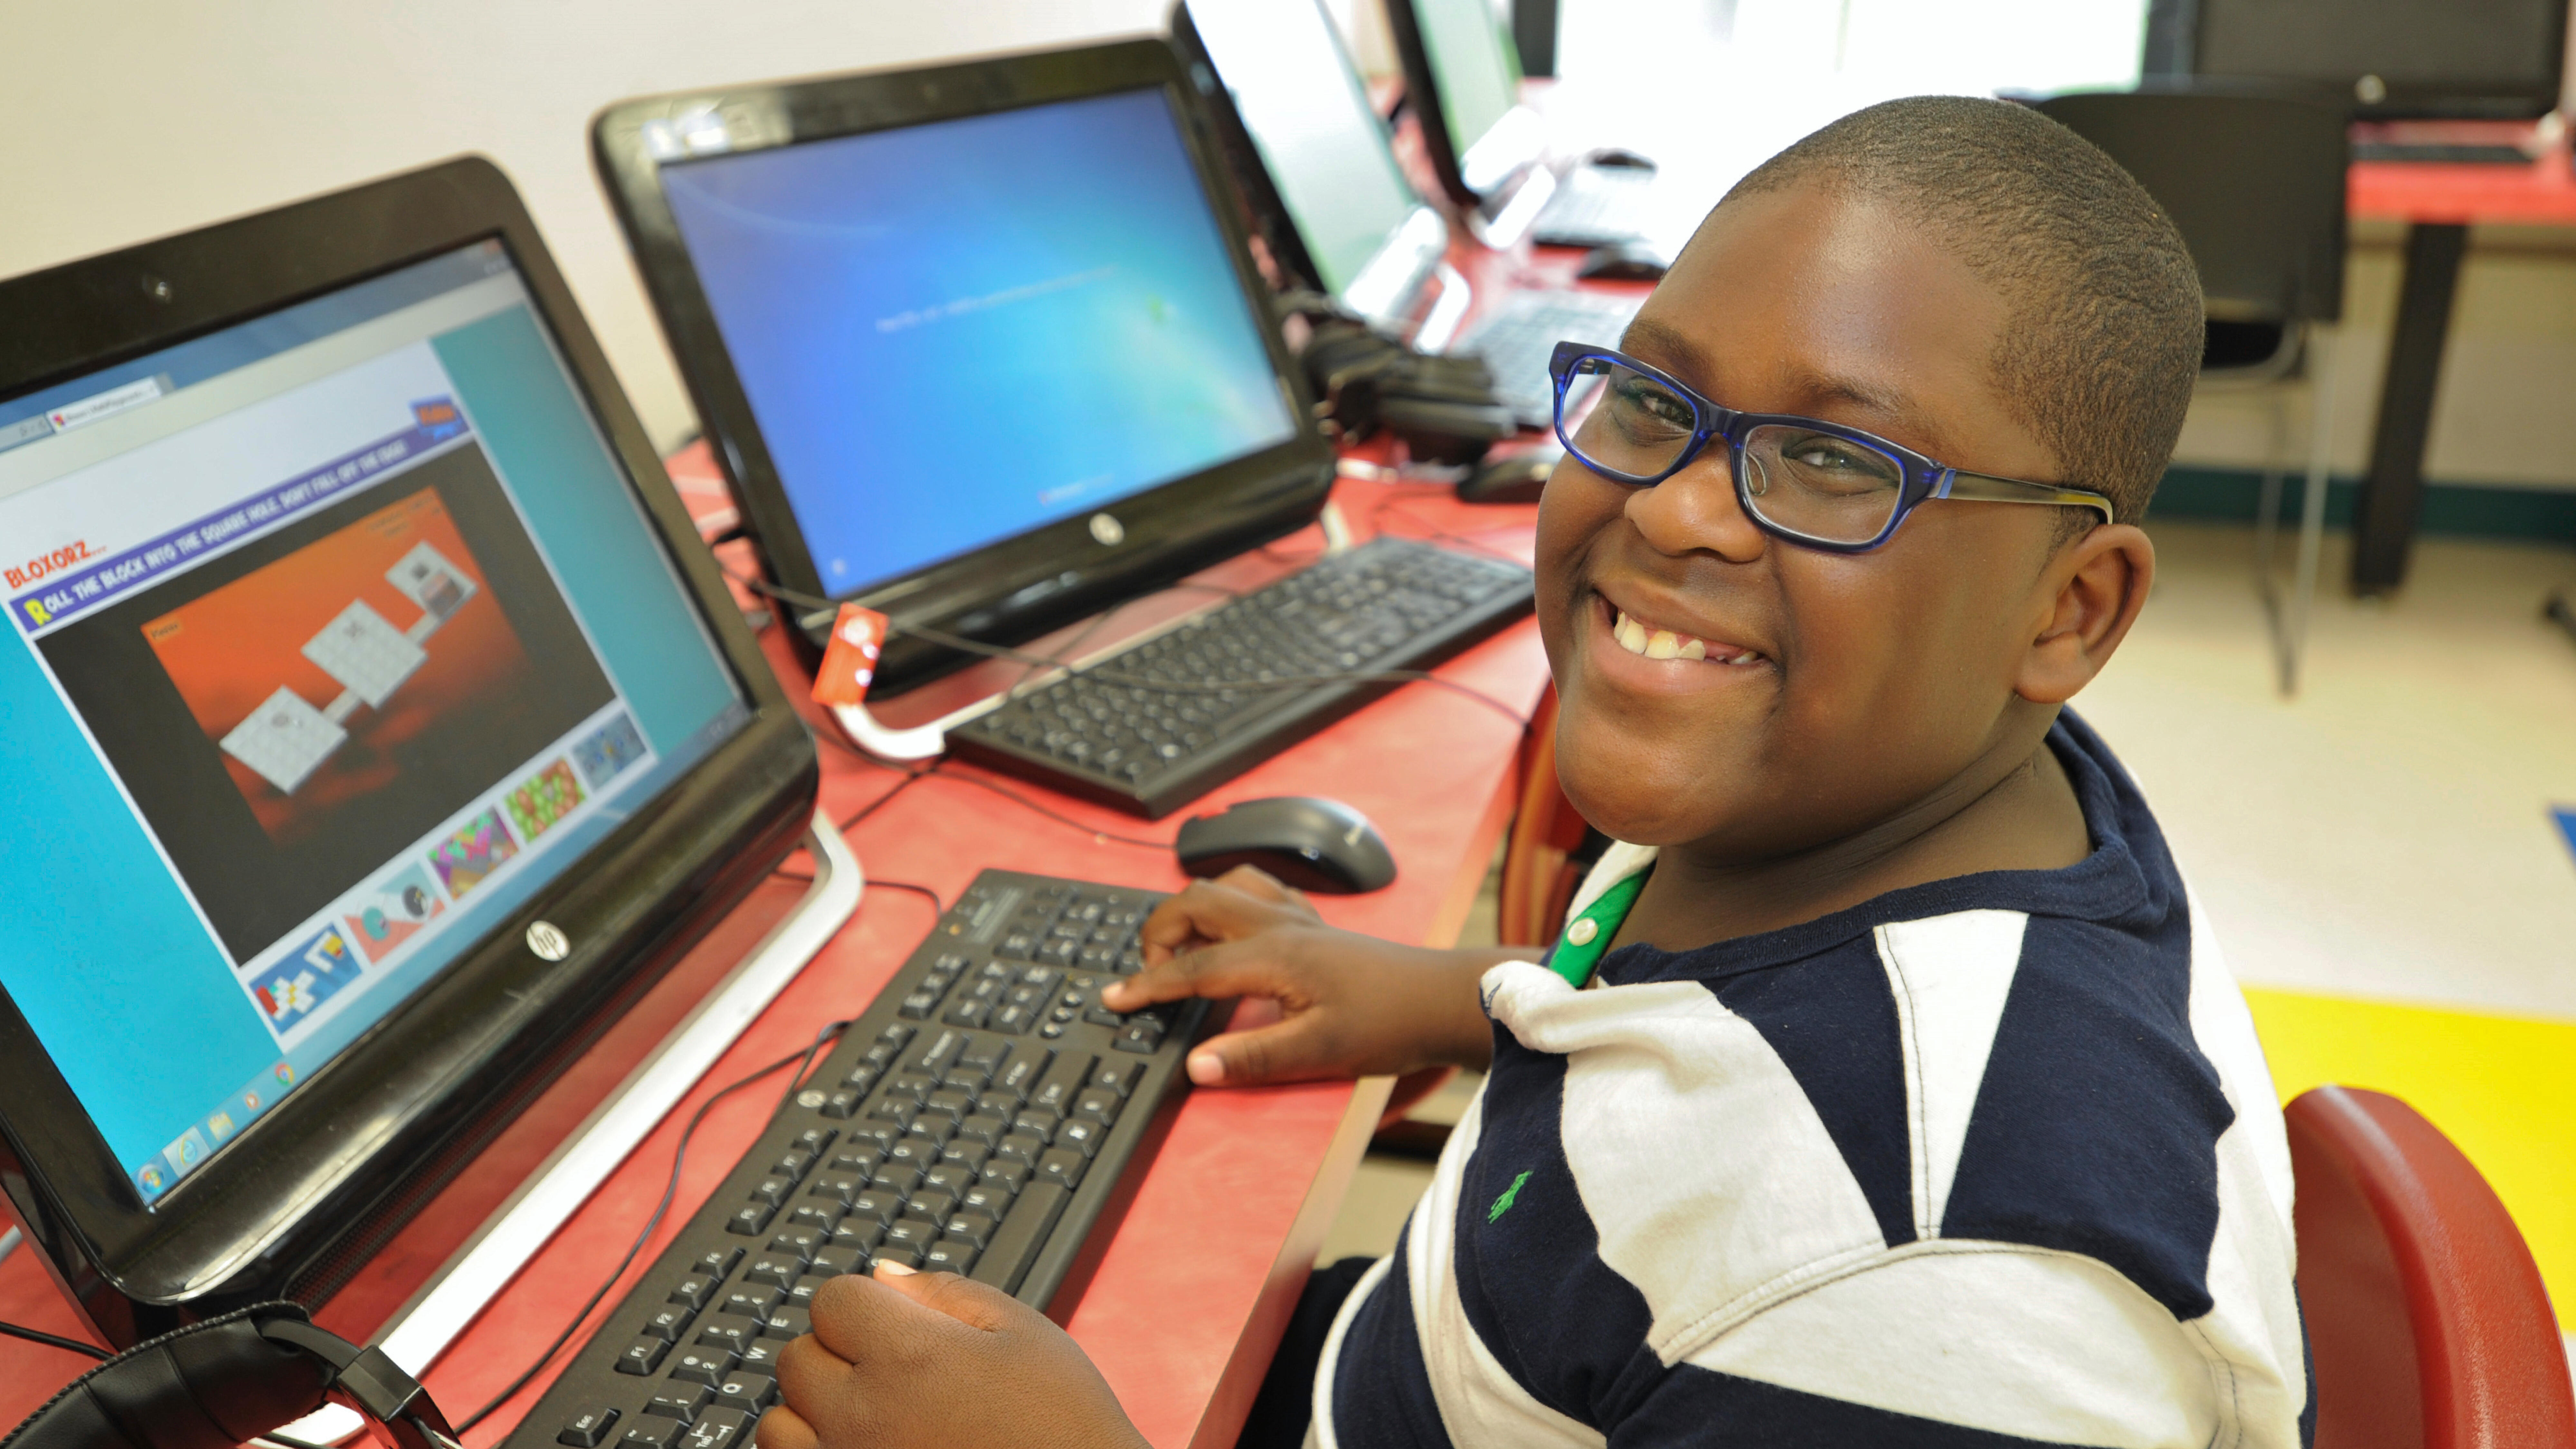 Special Education student smiling while working at a computer.